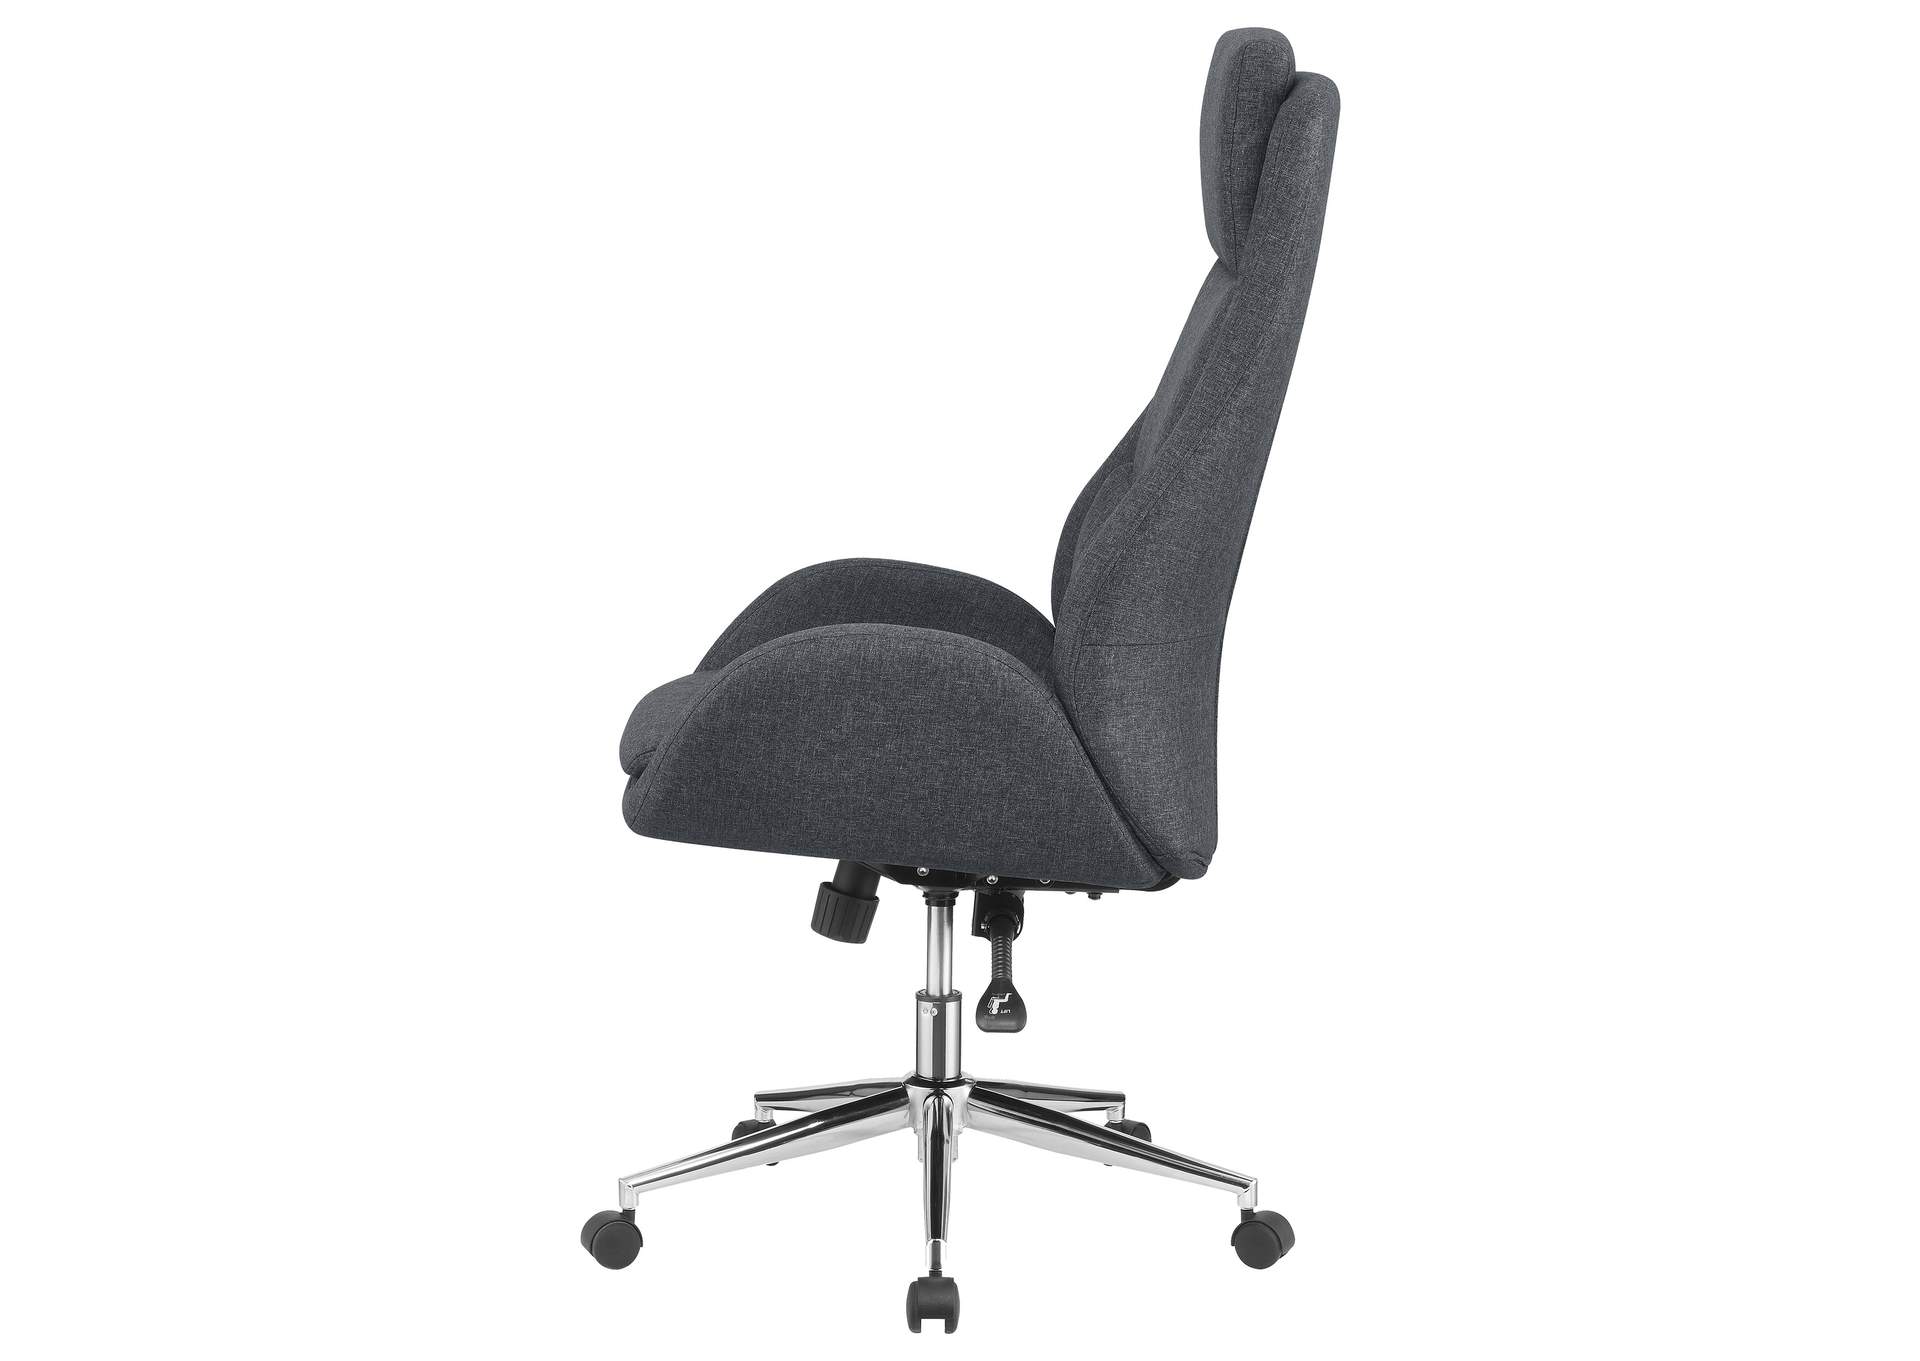 Cruz Upholstered Office Chair with Padded Seat Grey and Chrome,Coaster Furniture